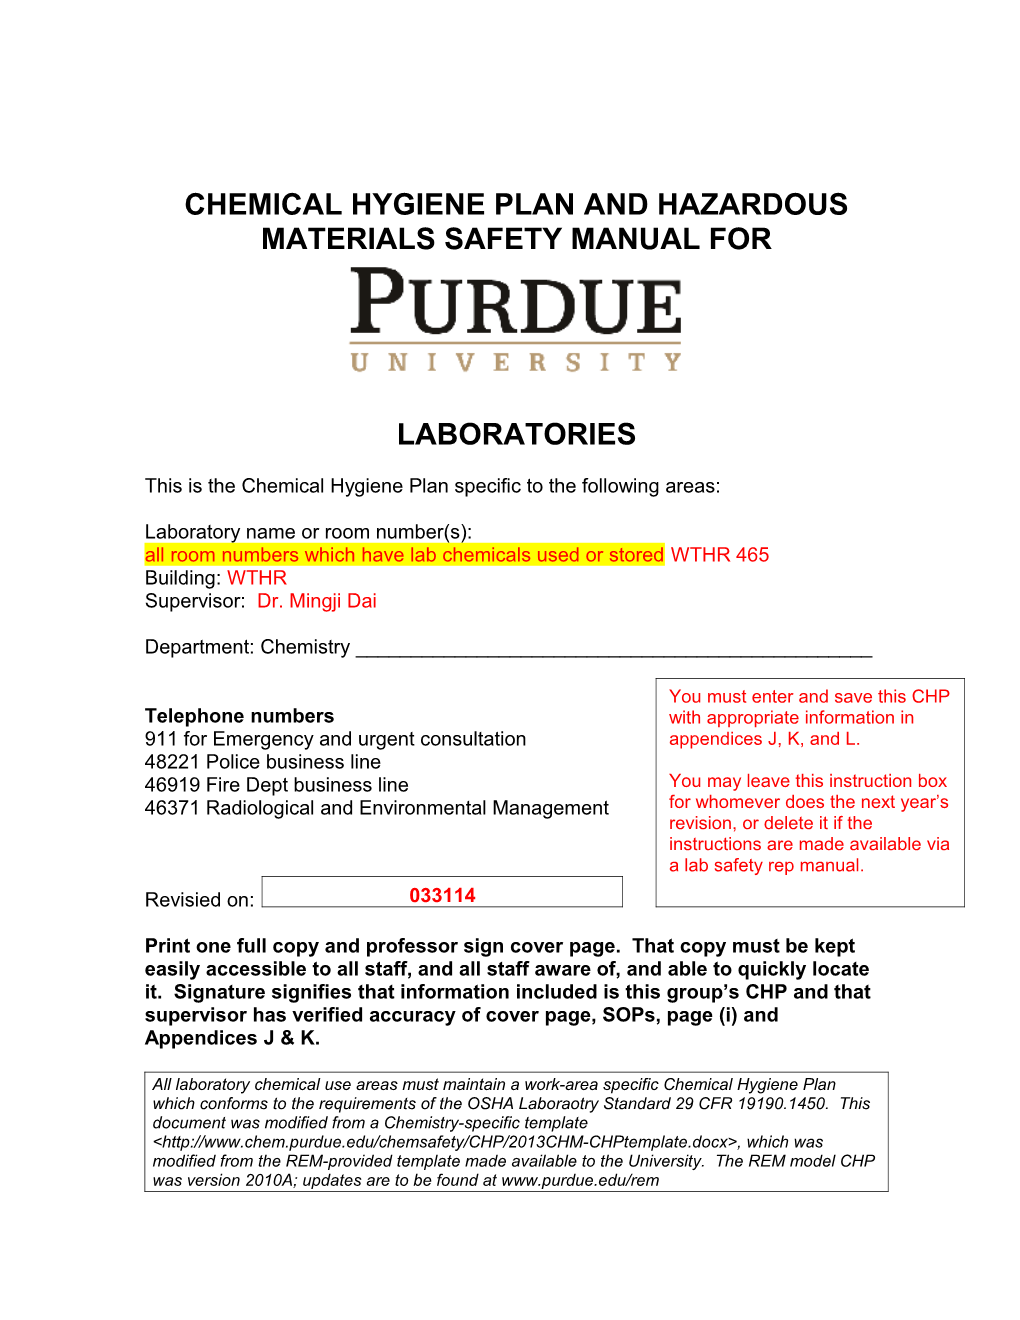 This Is the Chemical Hygiene Plan Specific to the Following Areas s1